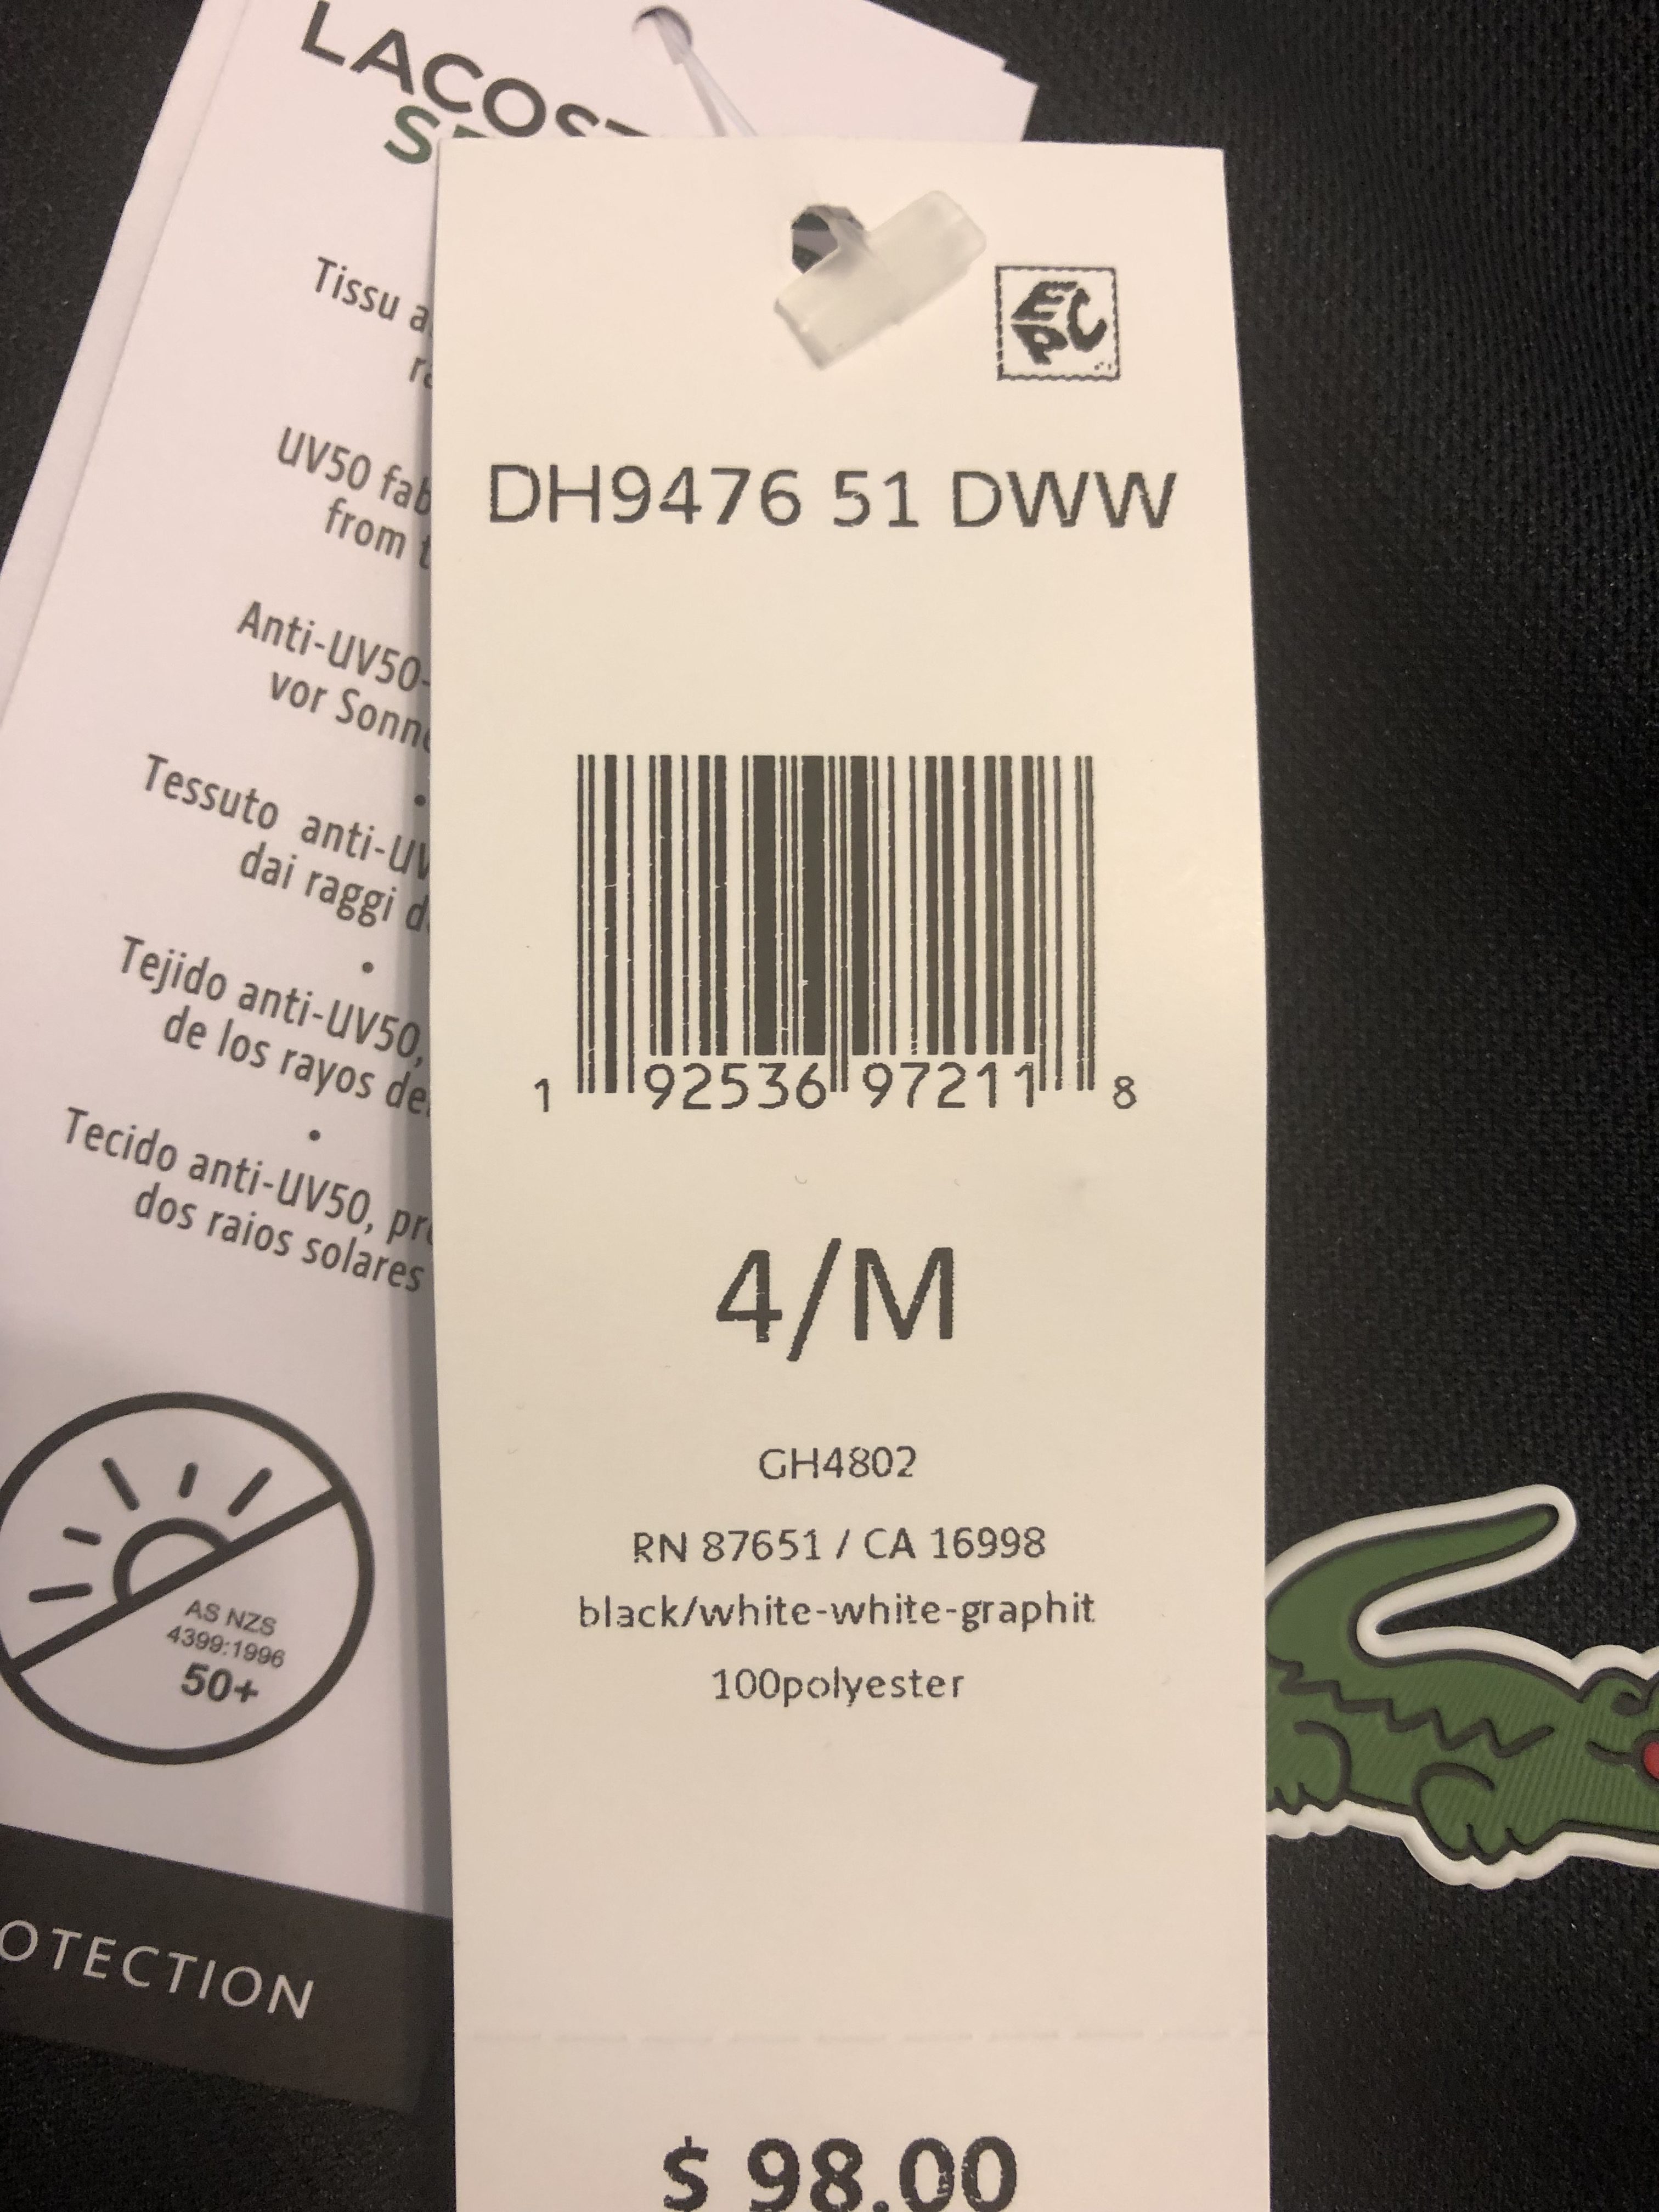 Lacoste Model Numbers for Shirts 